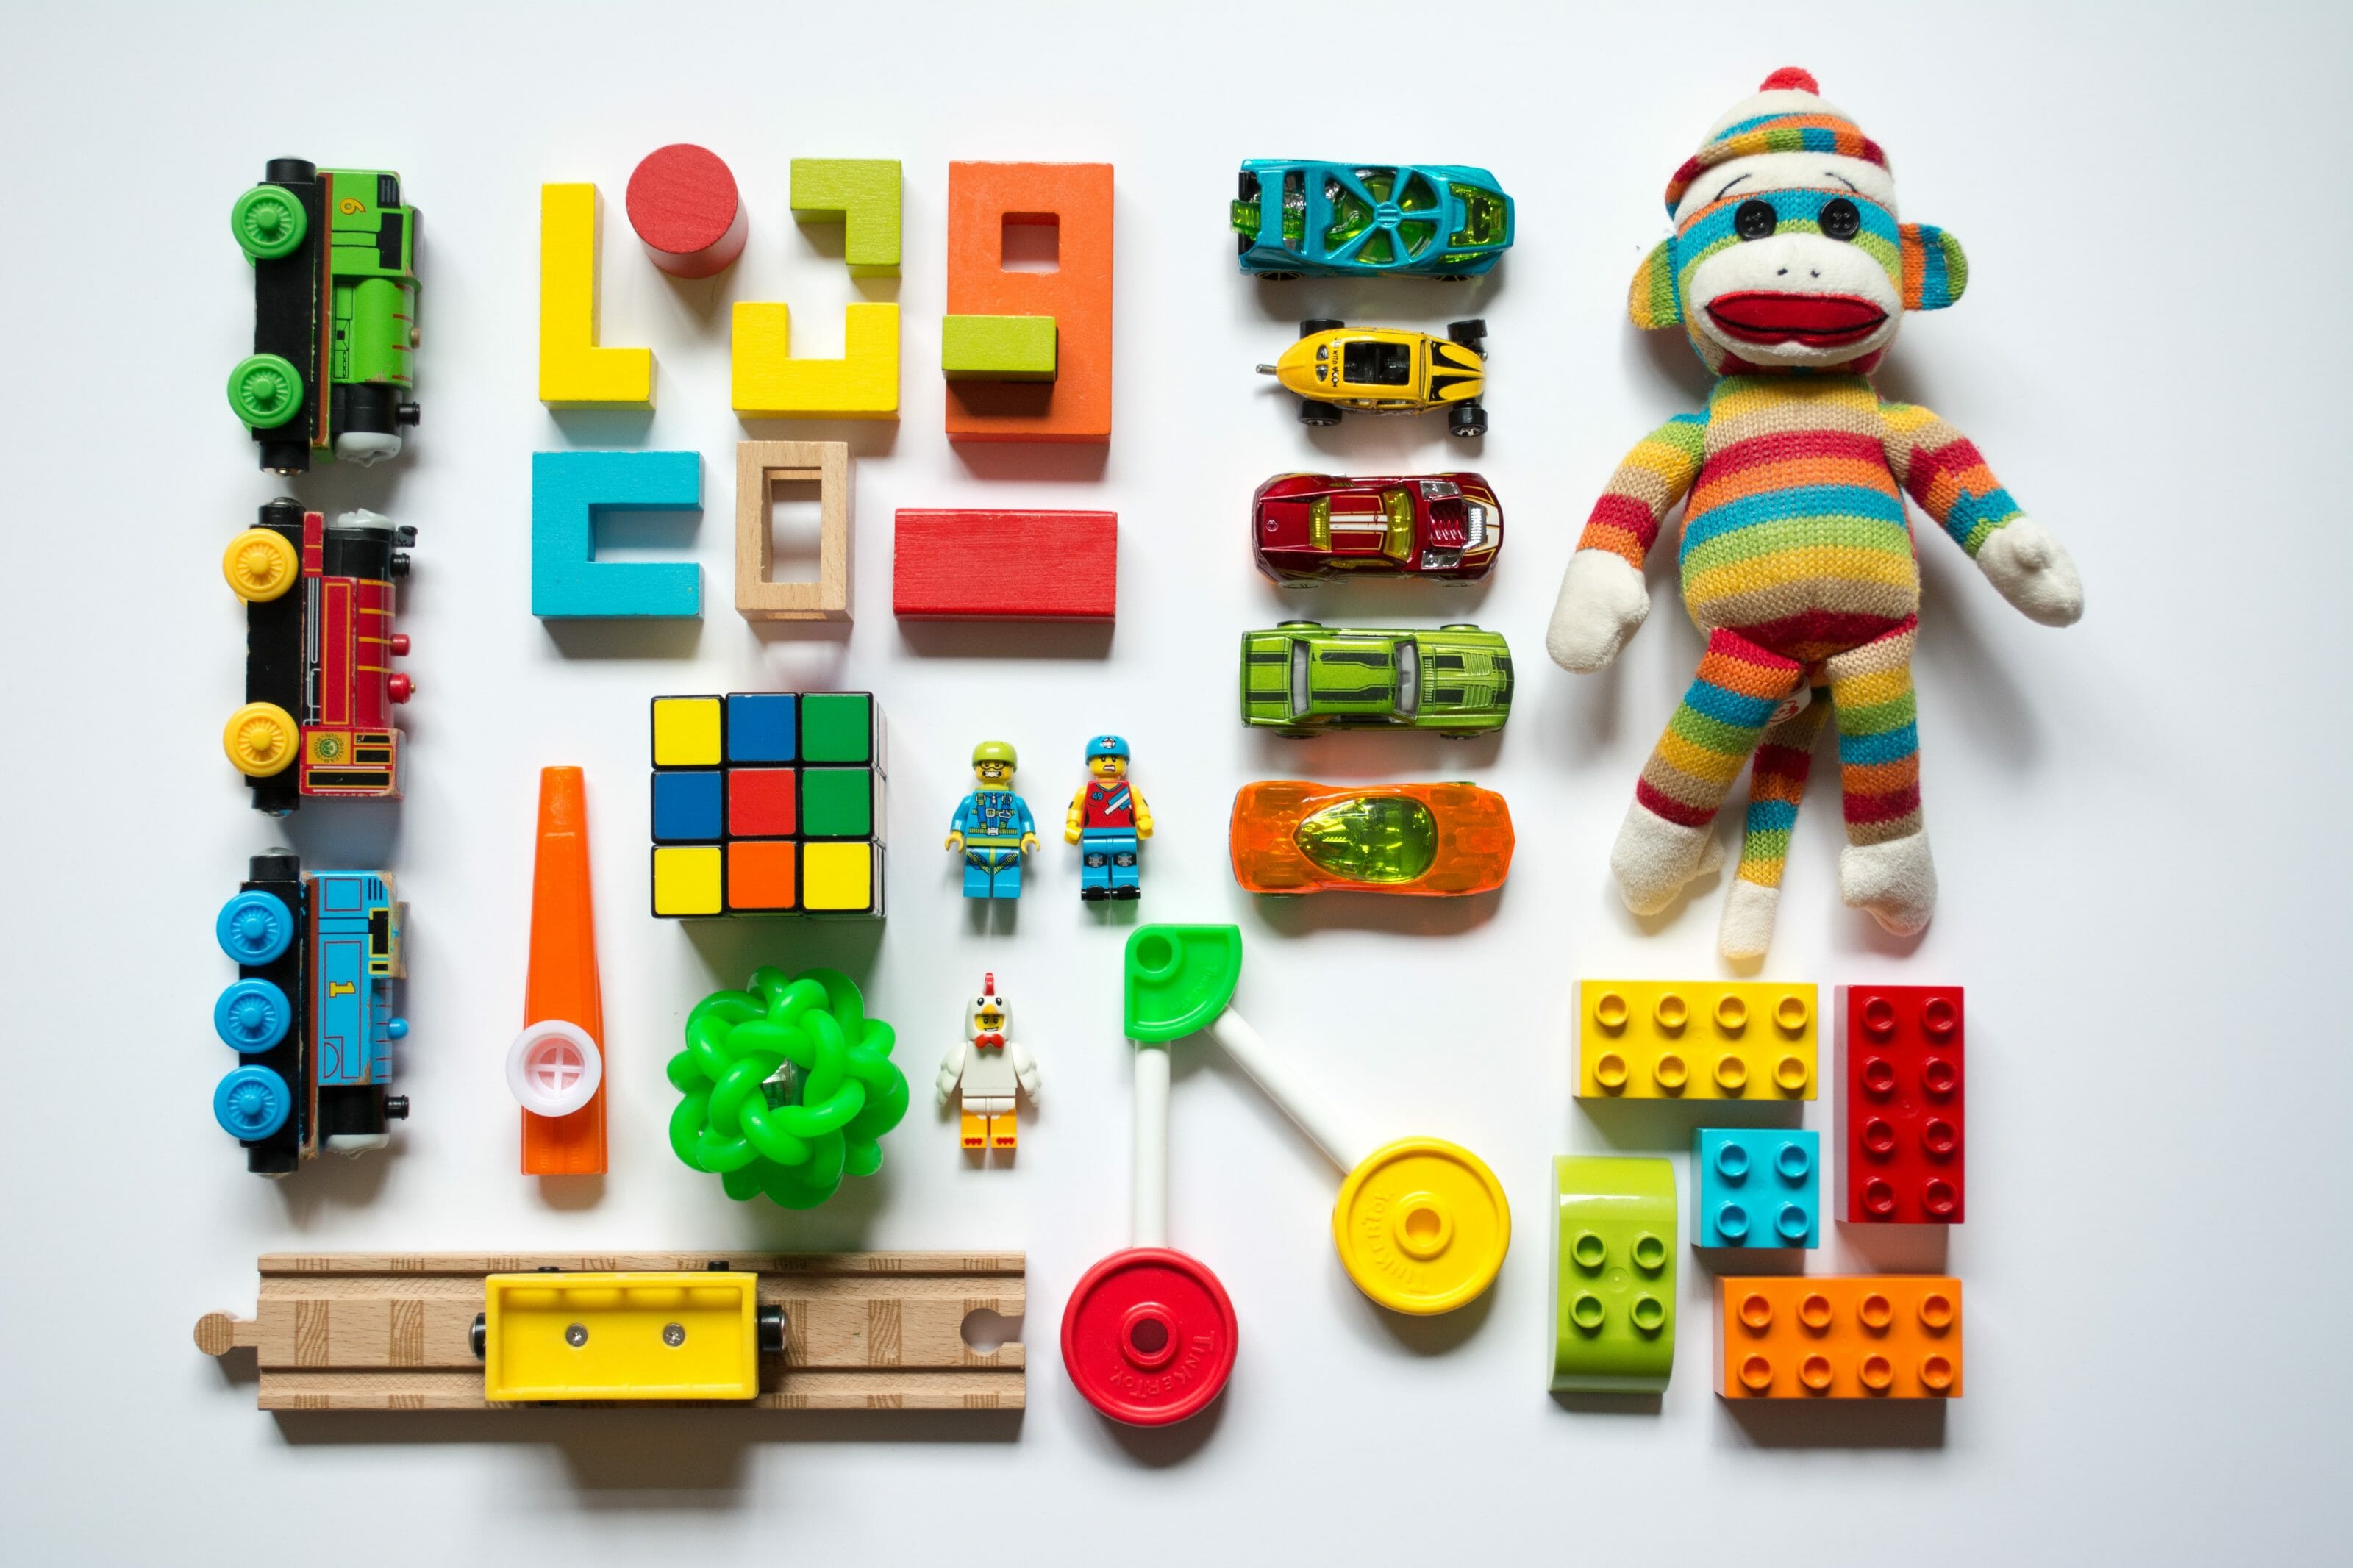 Toys laid out in grid on white background